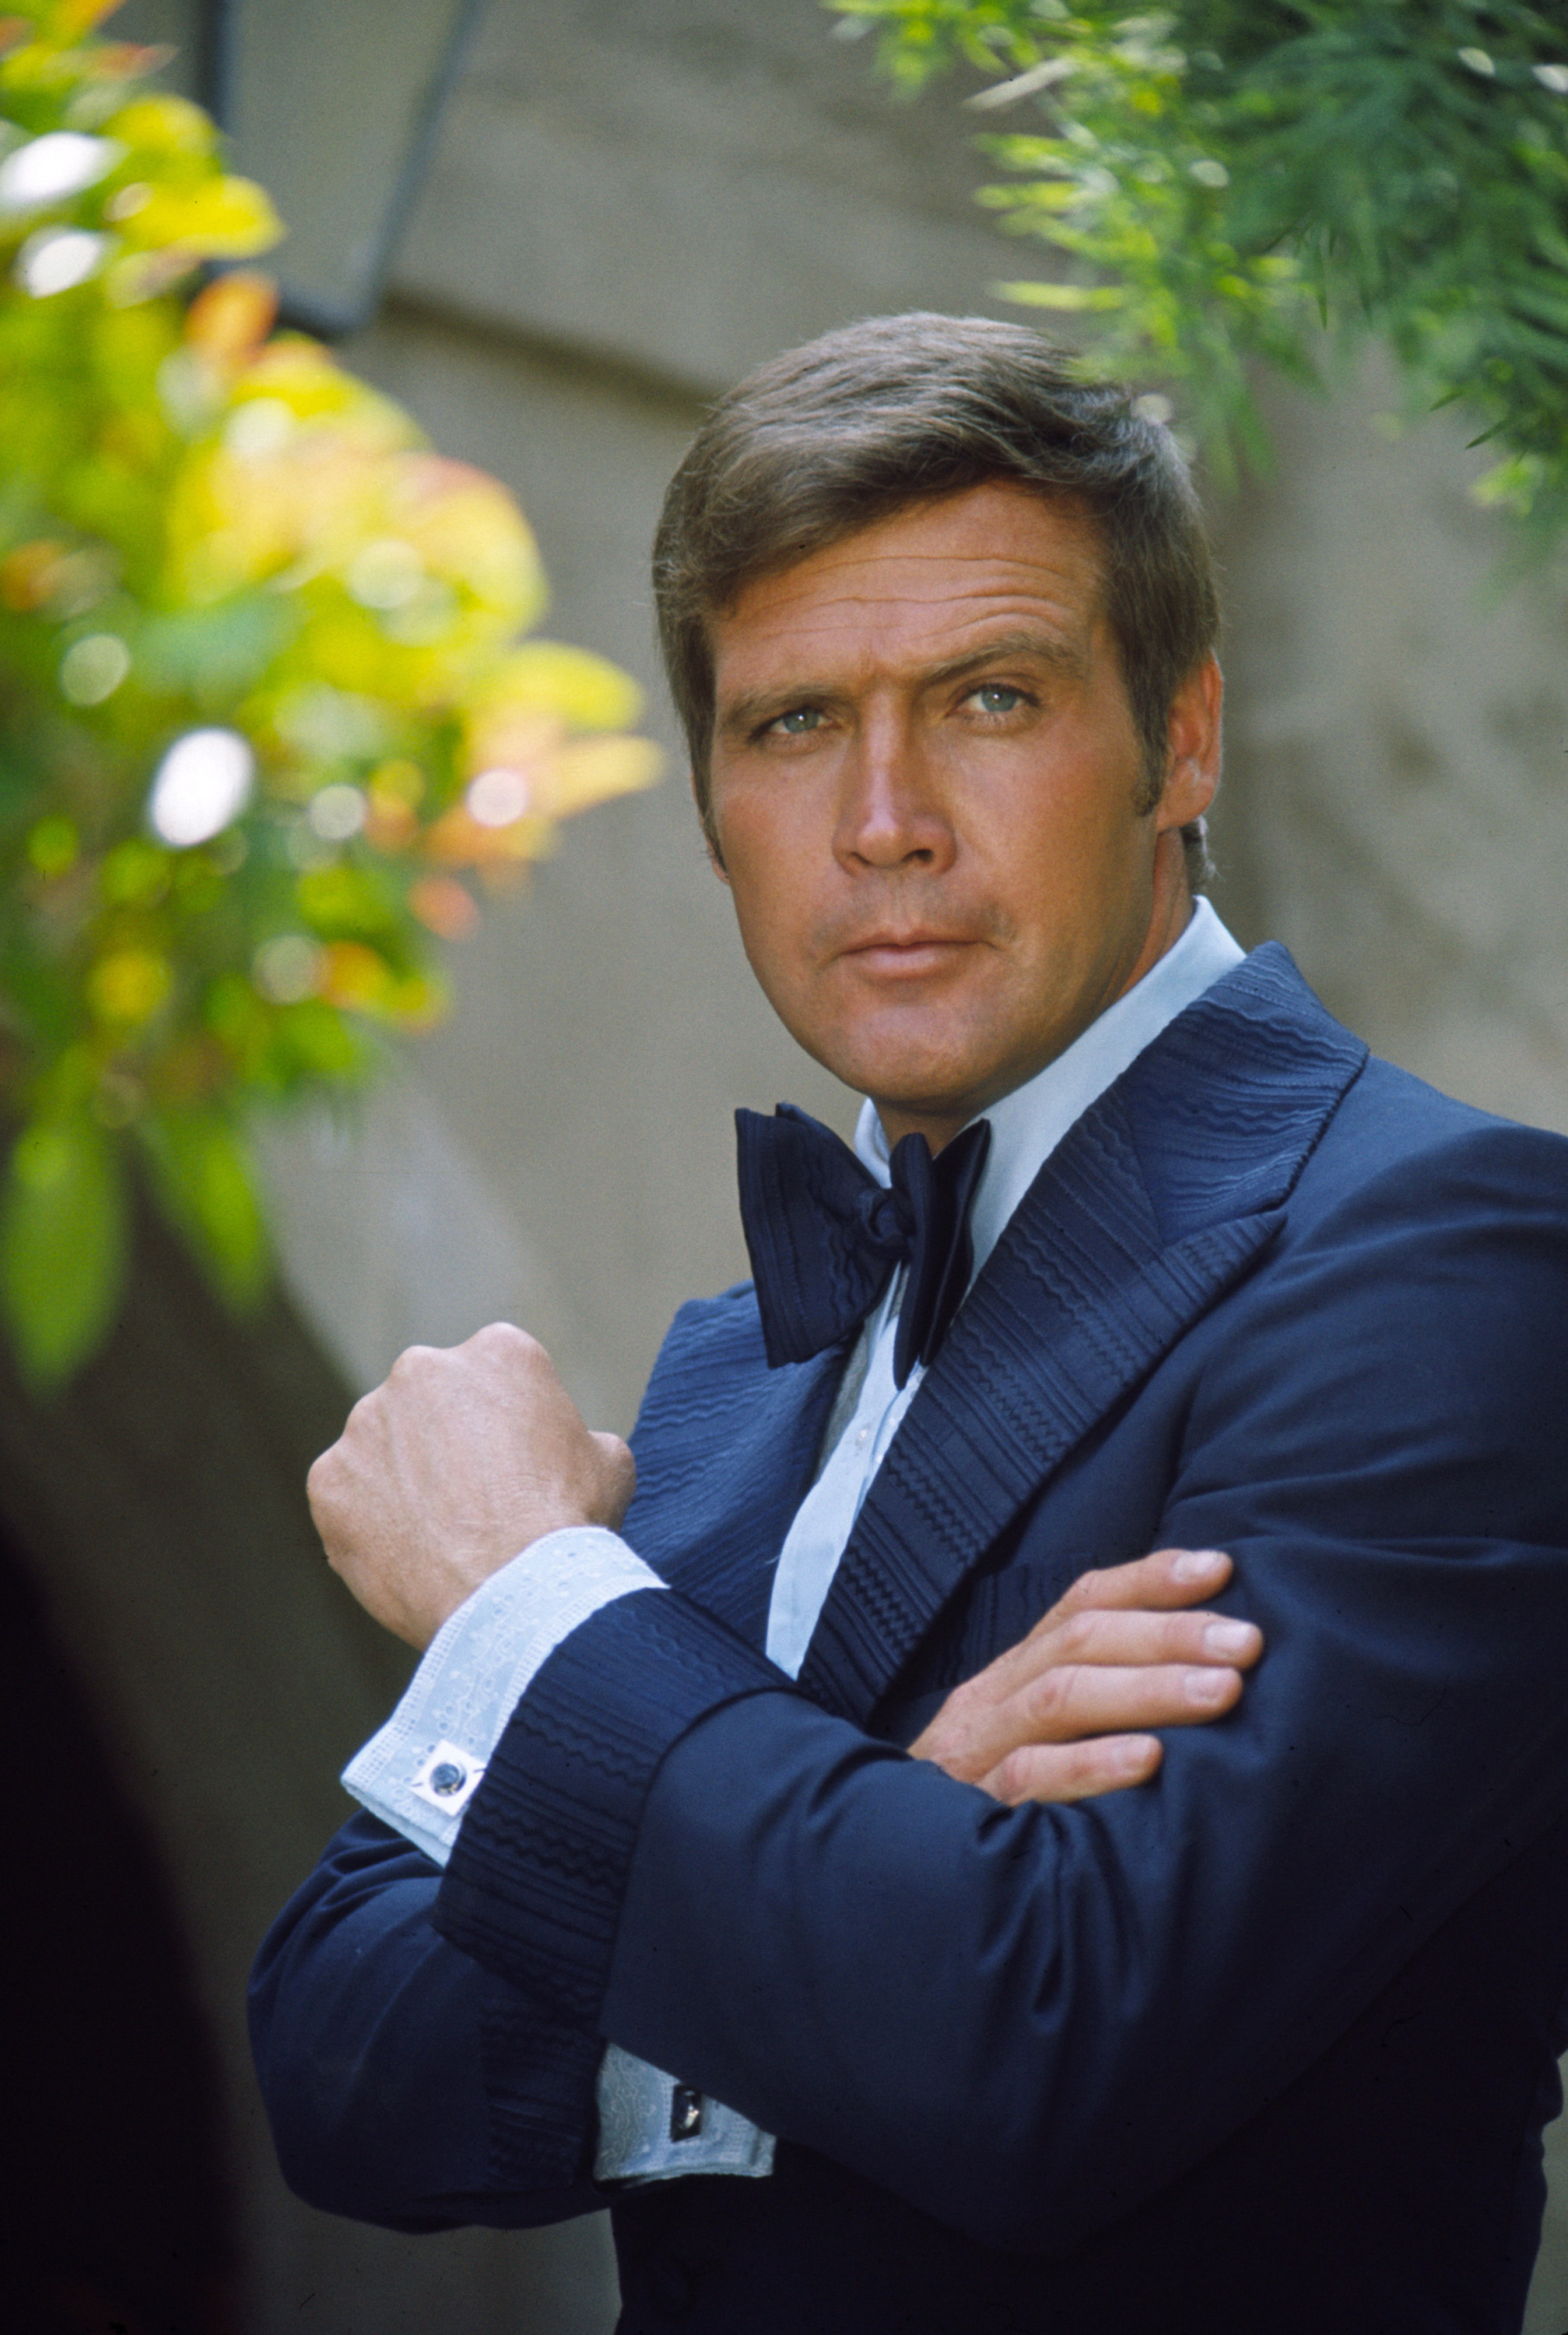 Lee Majors in "The Six Million Dollar Man" in 1973 | Source: Getty Images